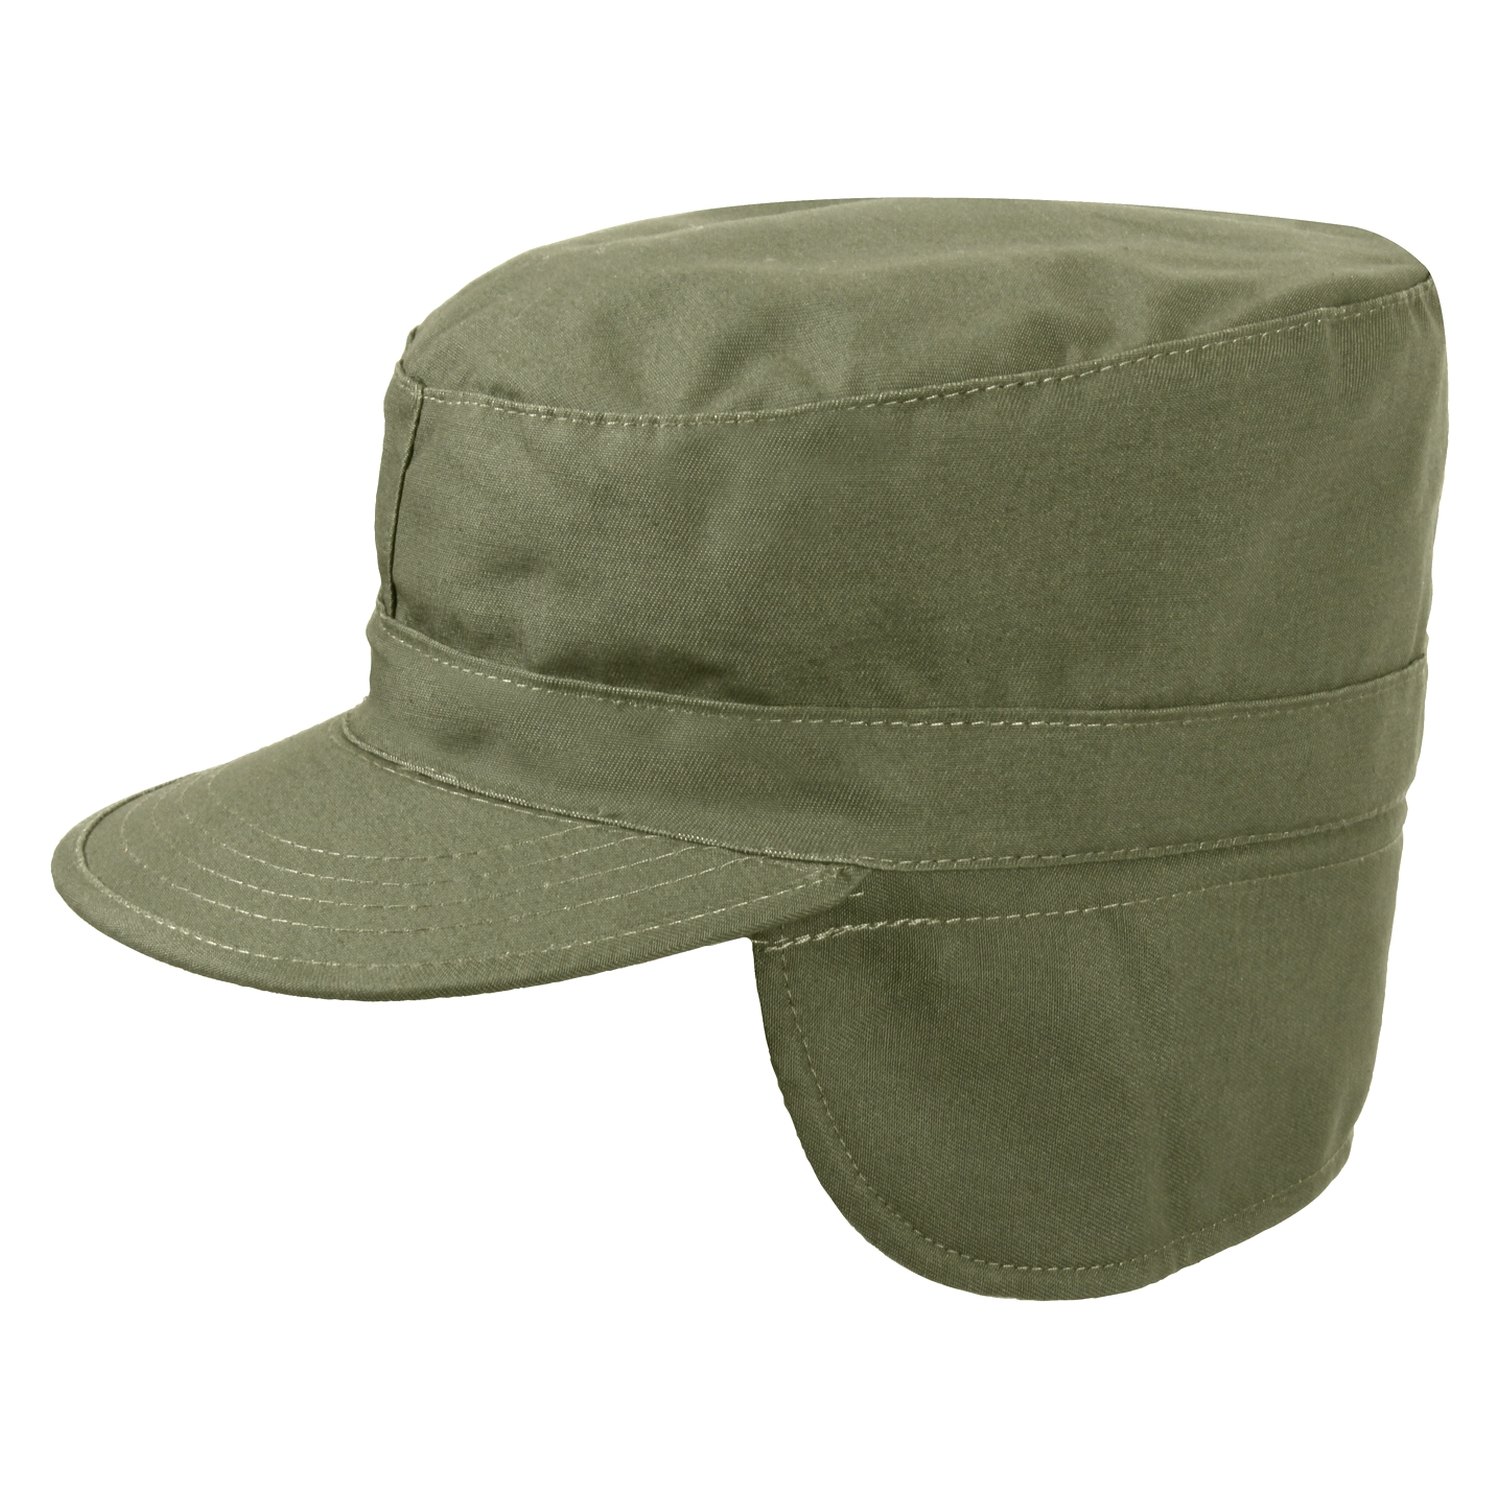 Rothco® 5712-Olive-Drab-7 - G.I. Type Combat 7 Olive Drab Cap with ...